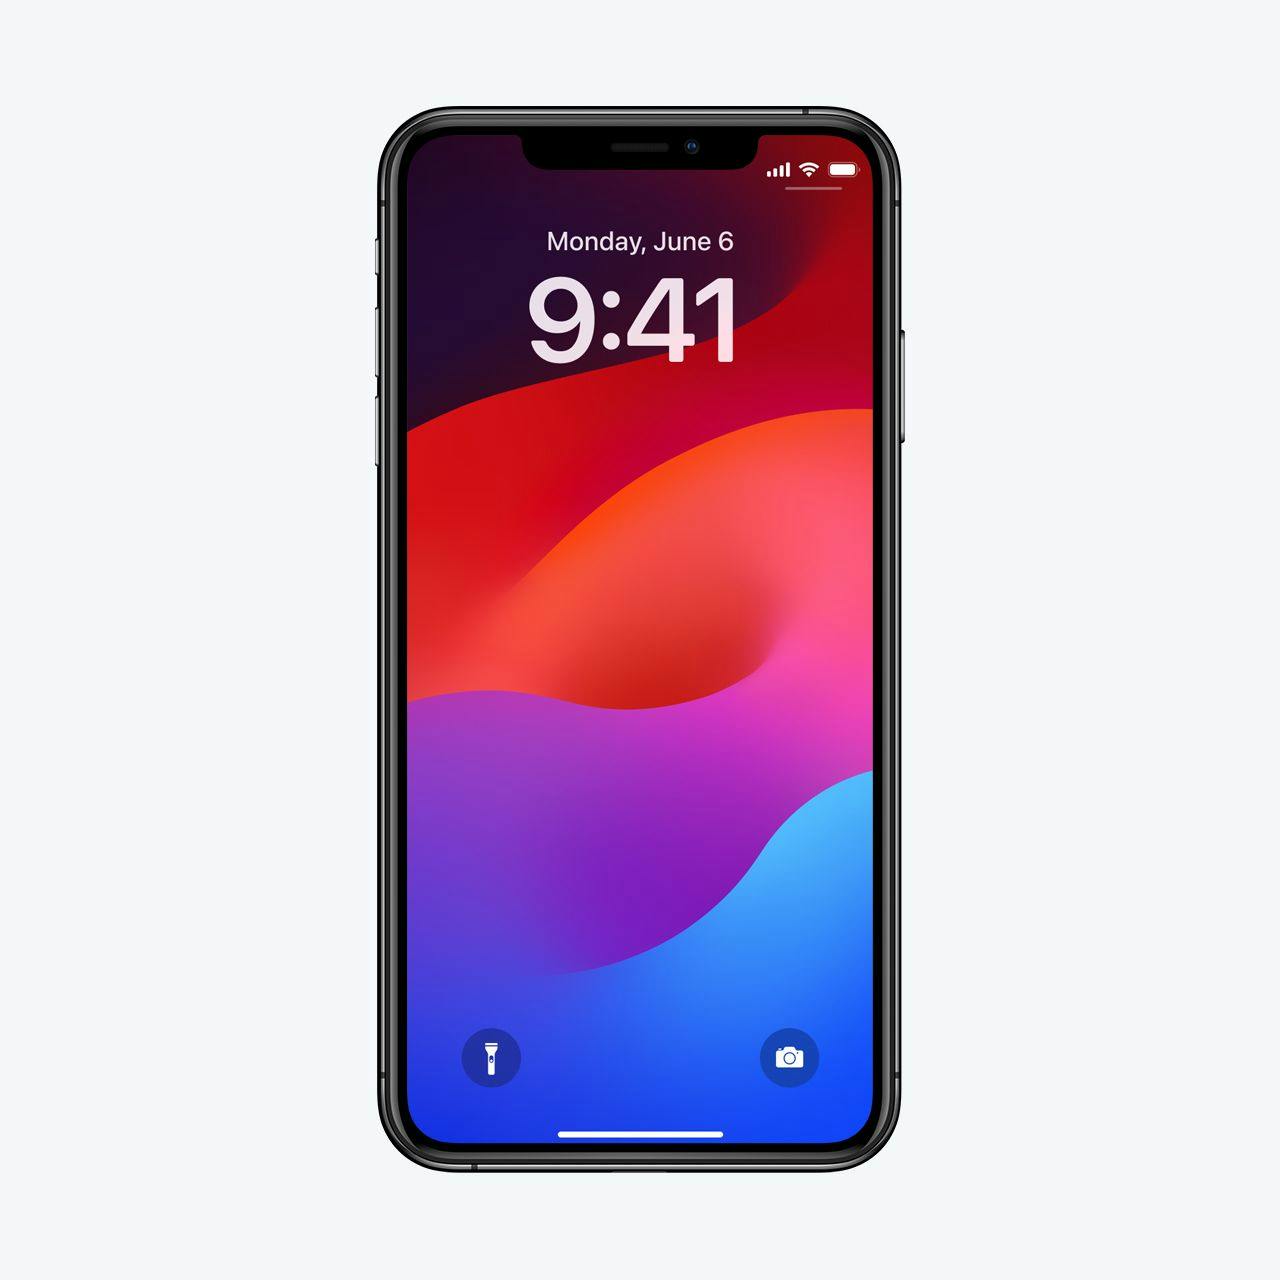 Image of iPhone XS Max.